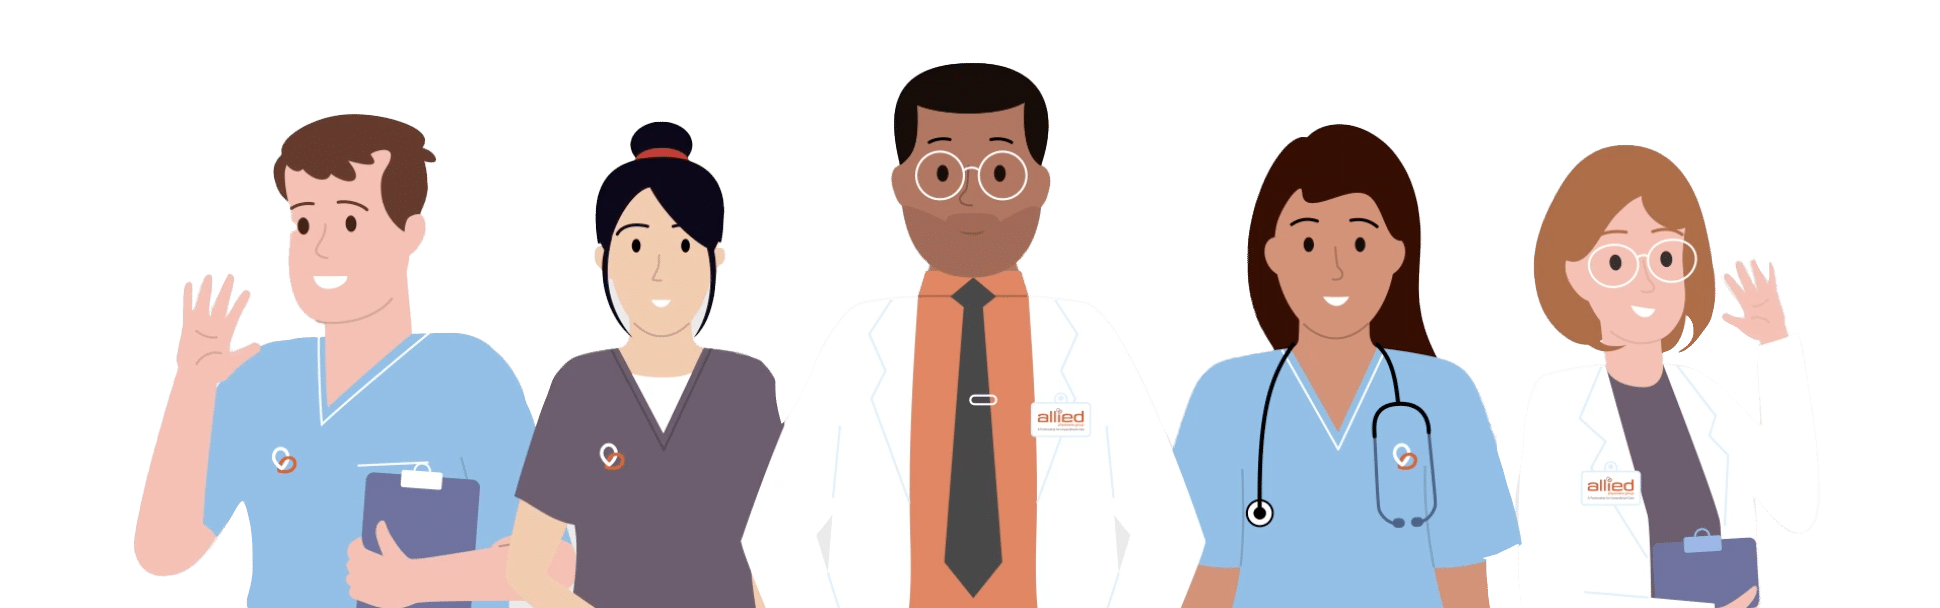 Group of doctors and nurses